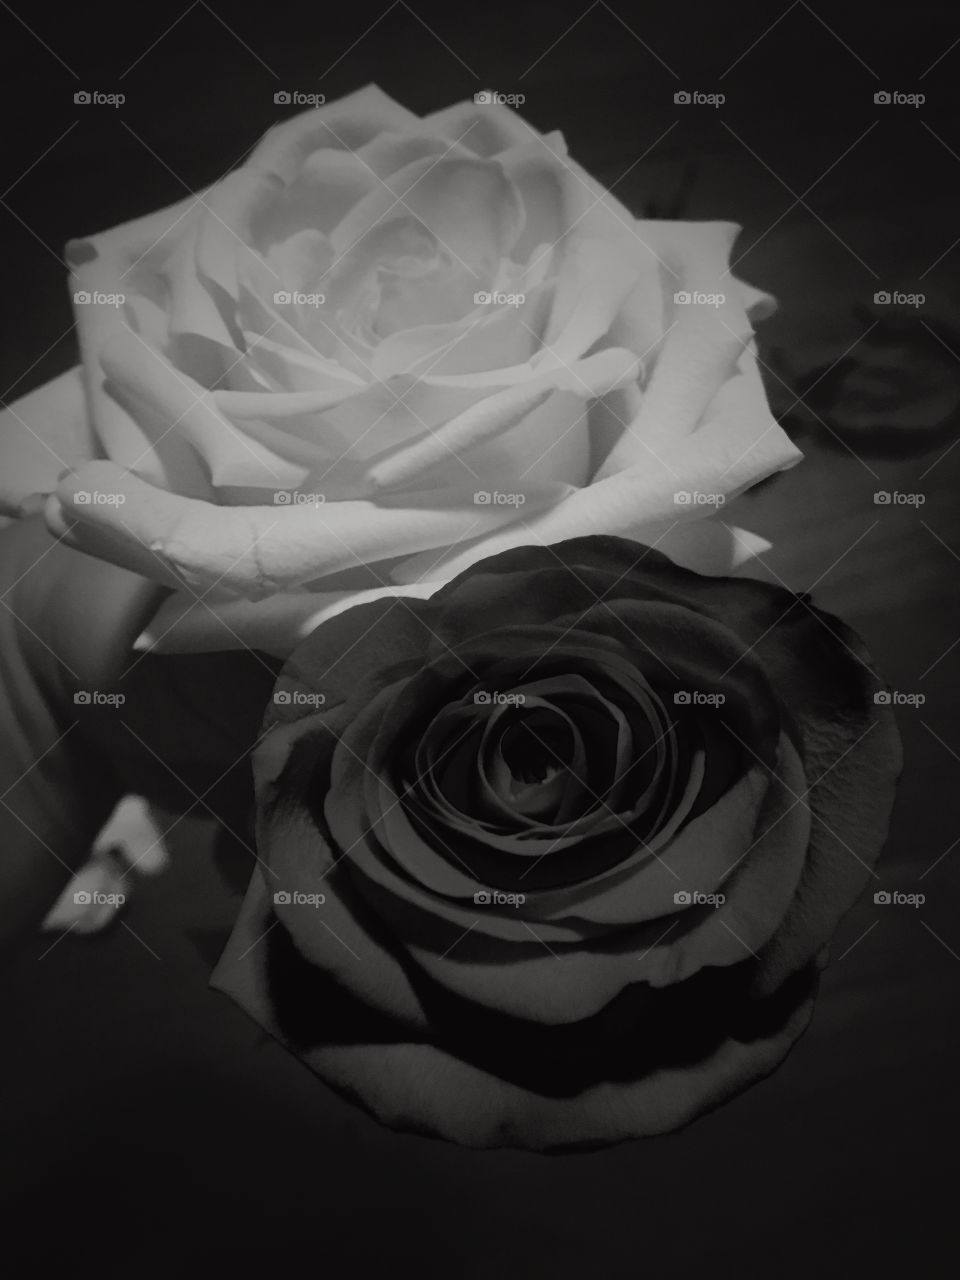 Black and white roses from a rose garden 